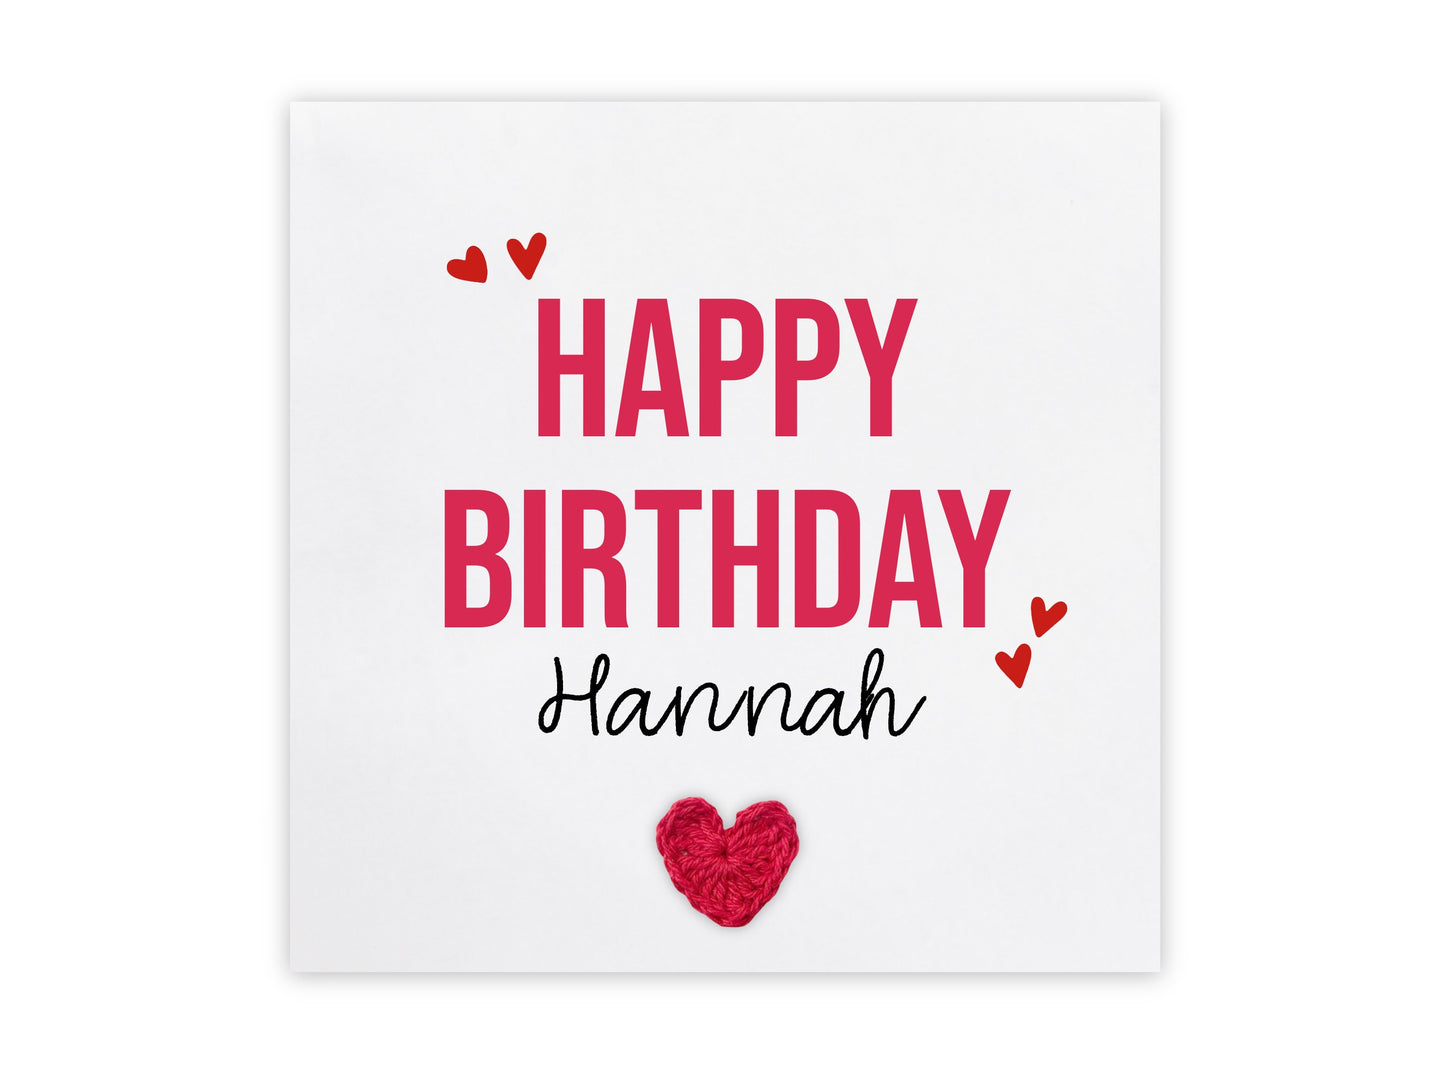 Personalised Happy Birthday Card For Her, Daughter Birthday Card, Niece Birthday Card, Birthday Card For Him, Special Birthday Card For Her